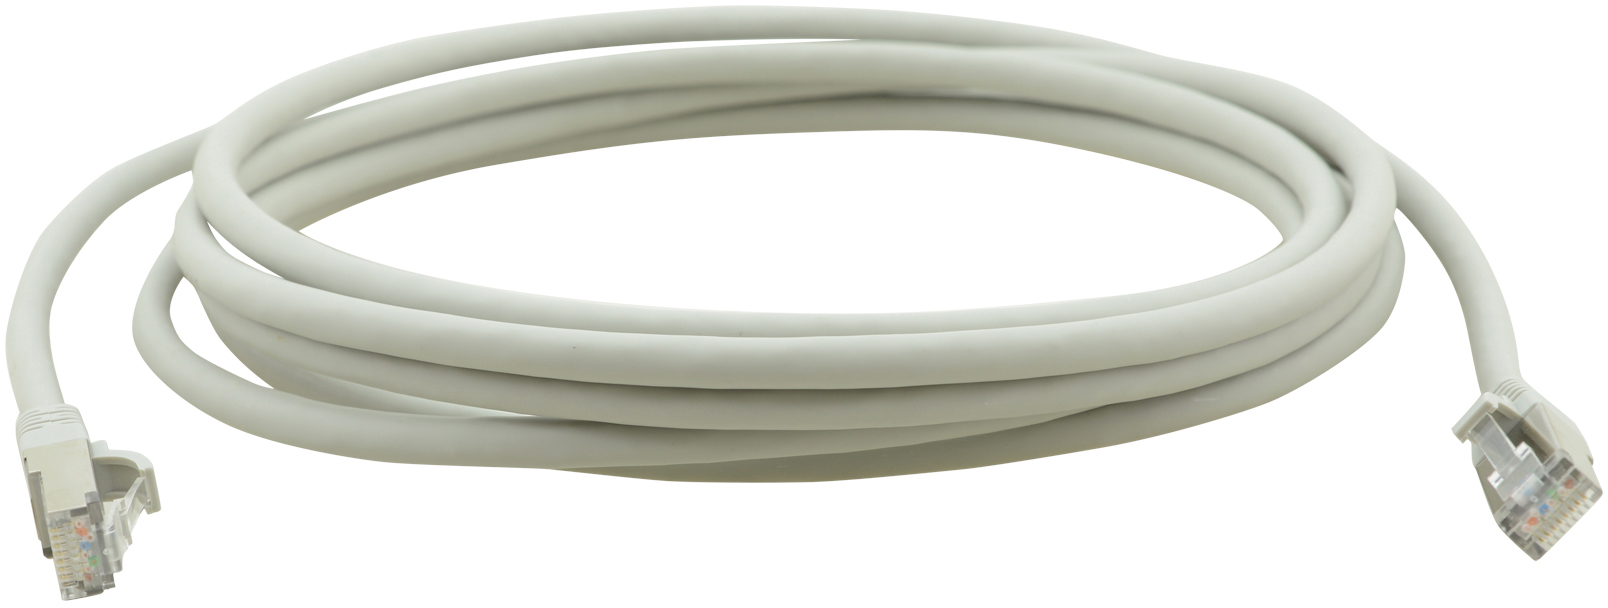 You Recently Viewed Kramer Slim CAT5E UTP Patch Cable Image